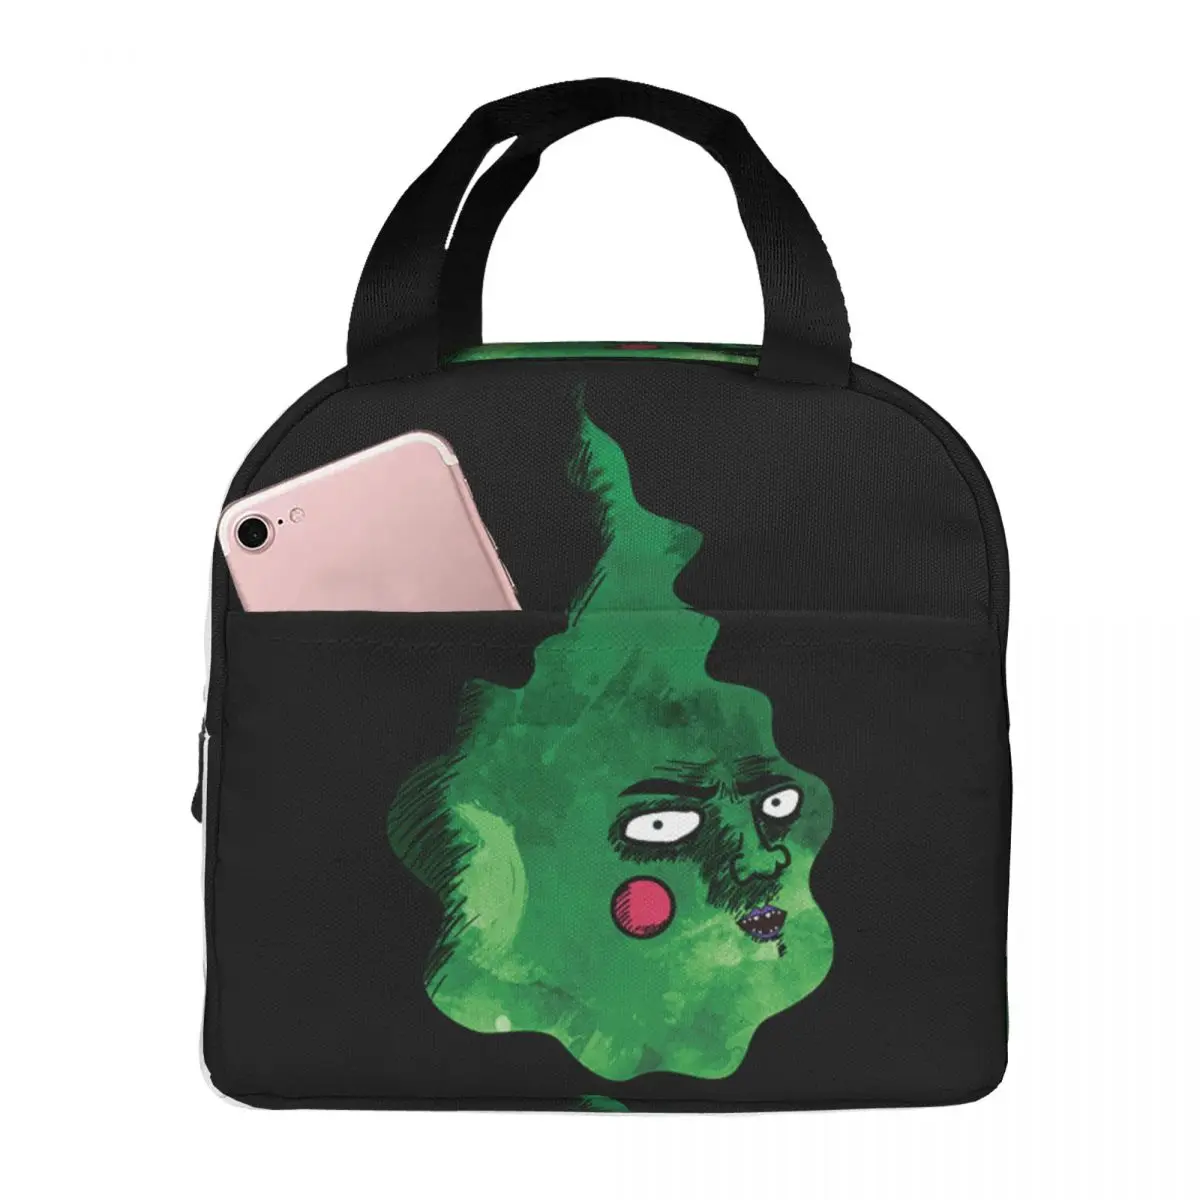 Lunch Bags for Women Kids Dimple Mob 100 Psycho Thermal Cooler Bags Portable Picnic School Shigeo Kageyama Tote Bento Pouch